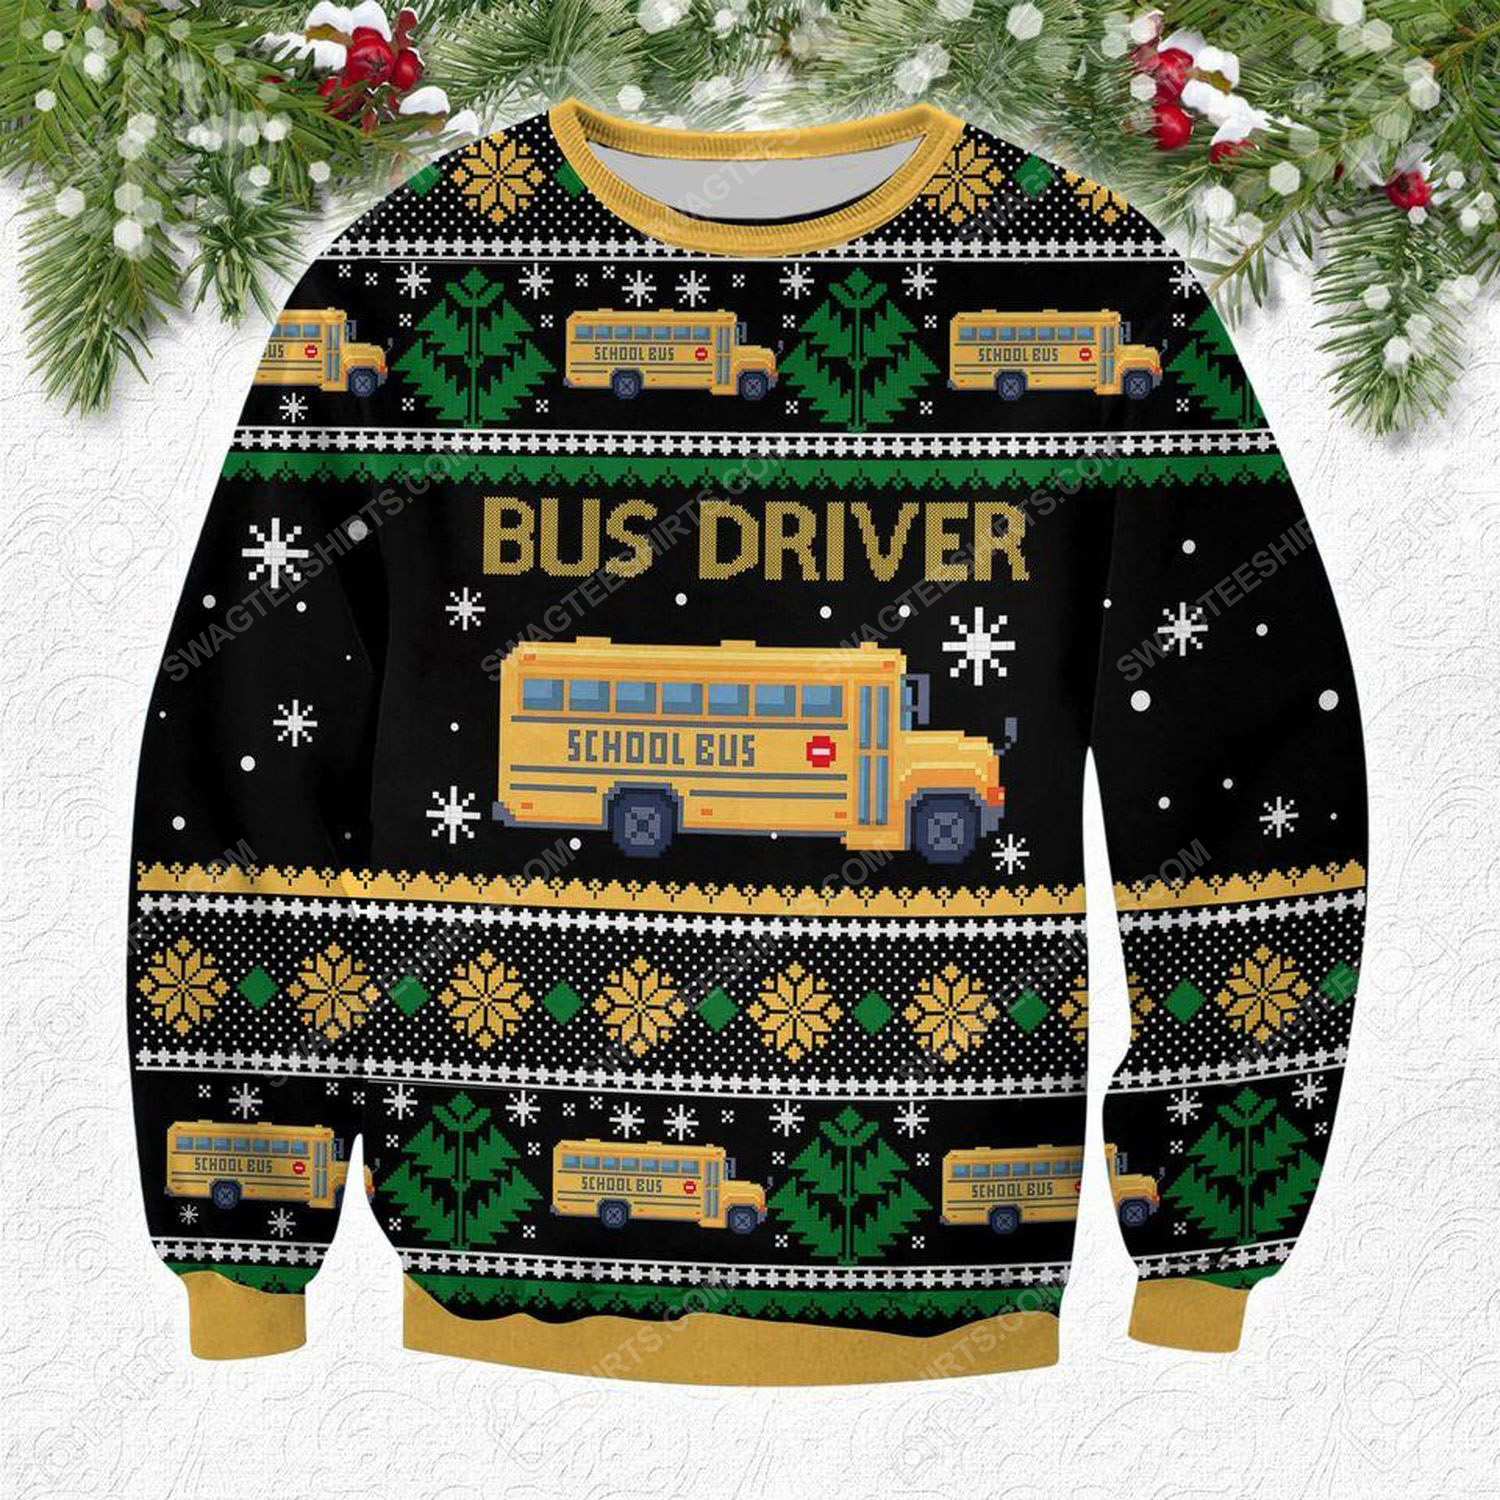 Bus driver all over print ugly christmas sweater 2 - Copy